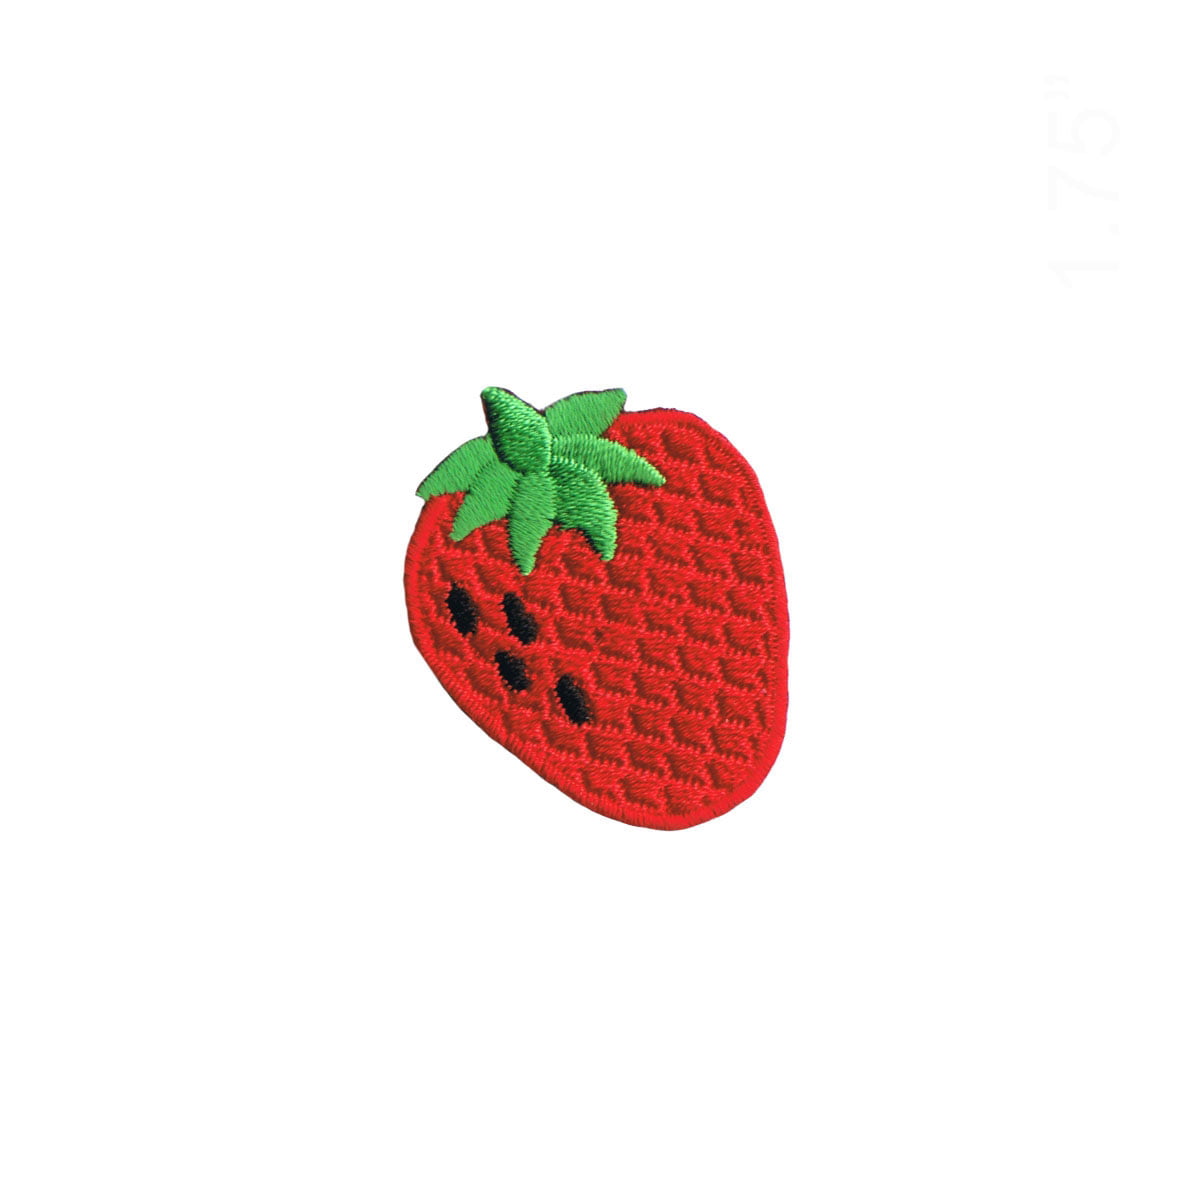 12pcs Fruits Apple Strawberry Patches DIY Fabric Badge Backpack Stickers Appliques Embroidery Iron on Cartoon Pineapple Patch Jeans 